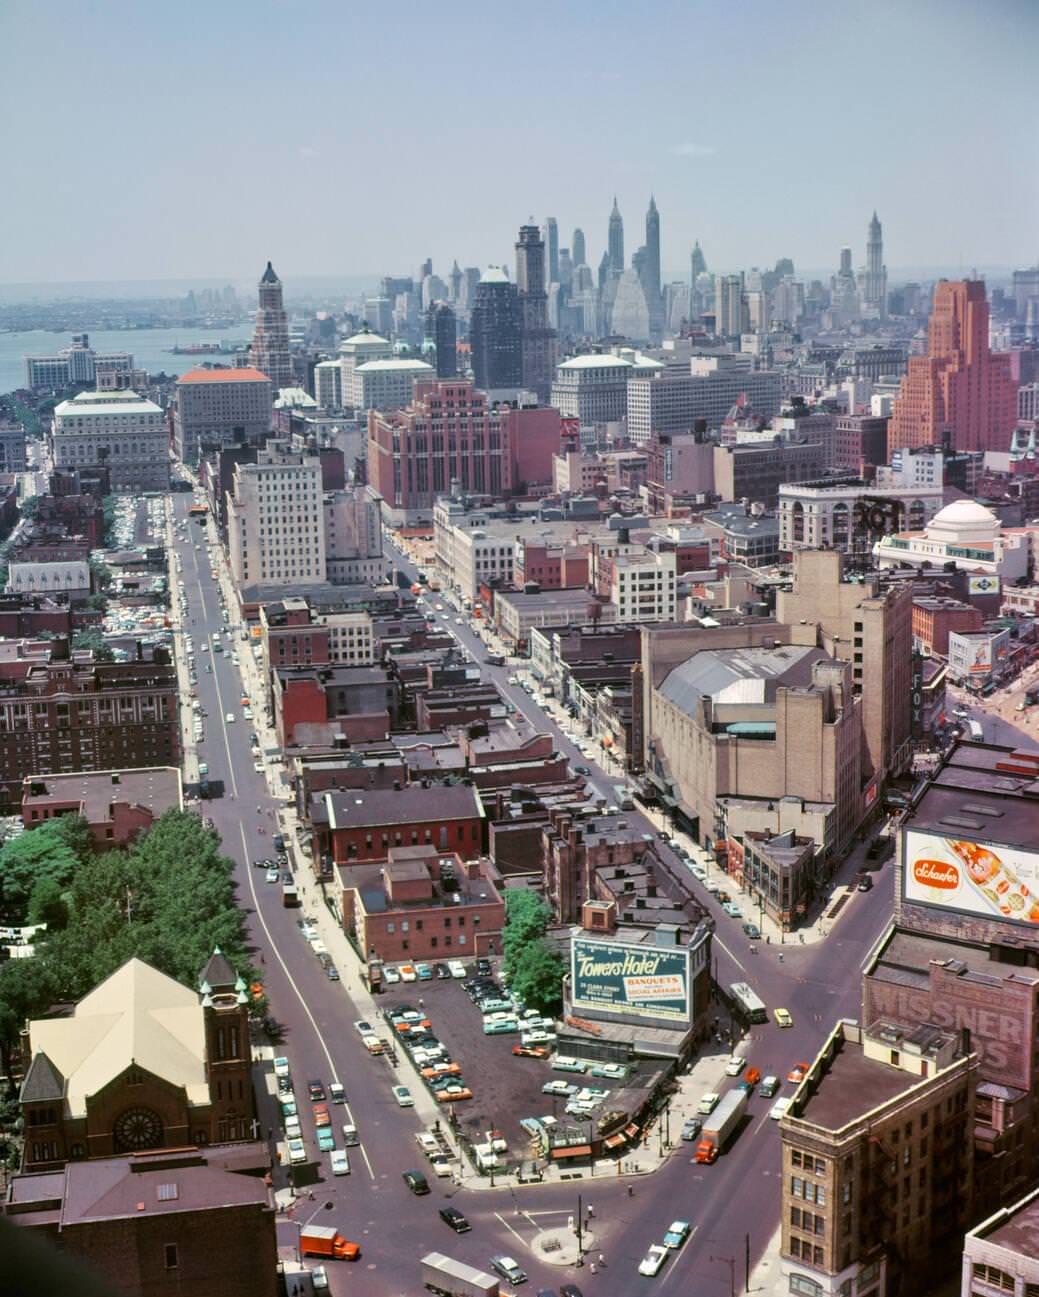 Aerial View Of Downtown Brooklyn From Williamsburg Savings Bank Roof, With Manhattan In The Background, 1950S.